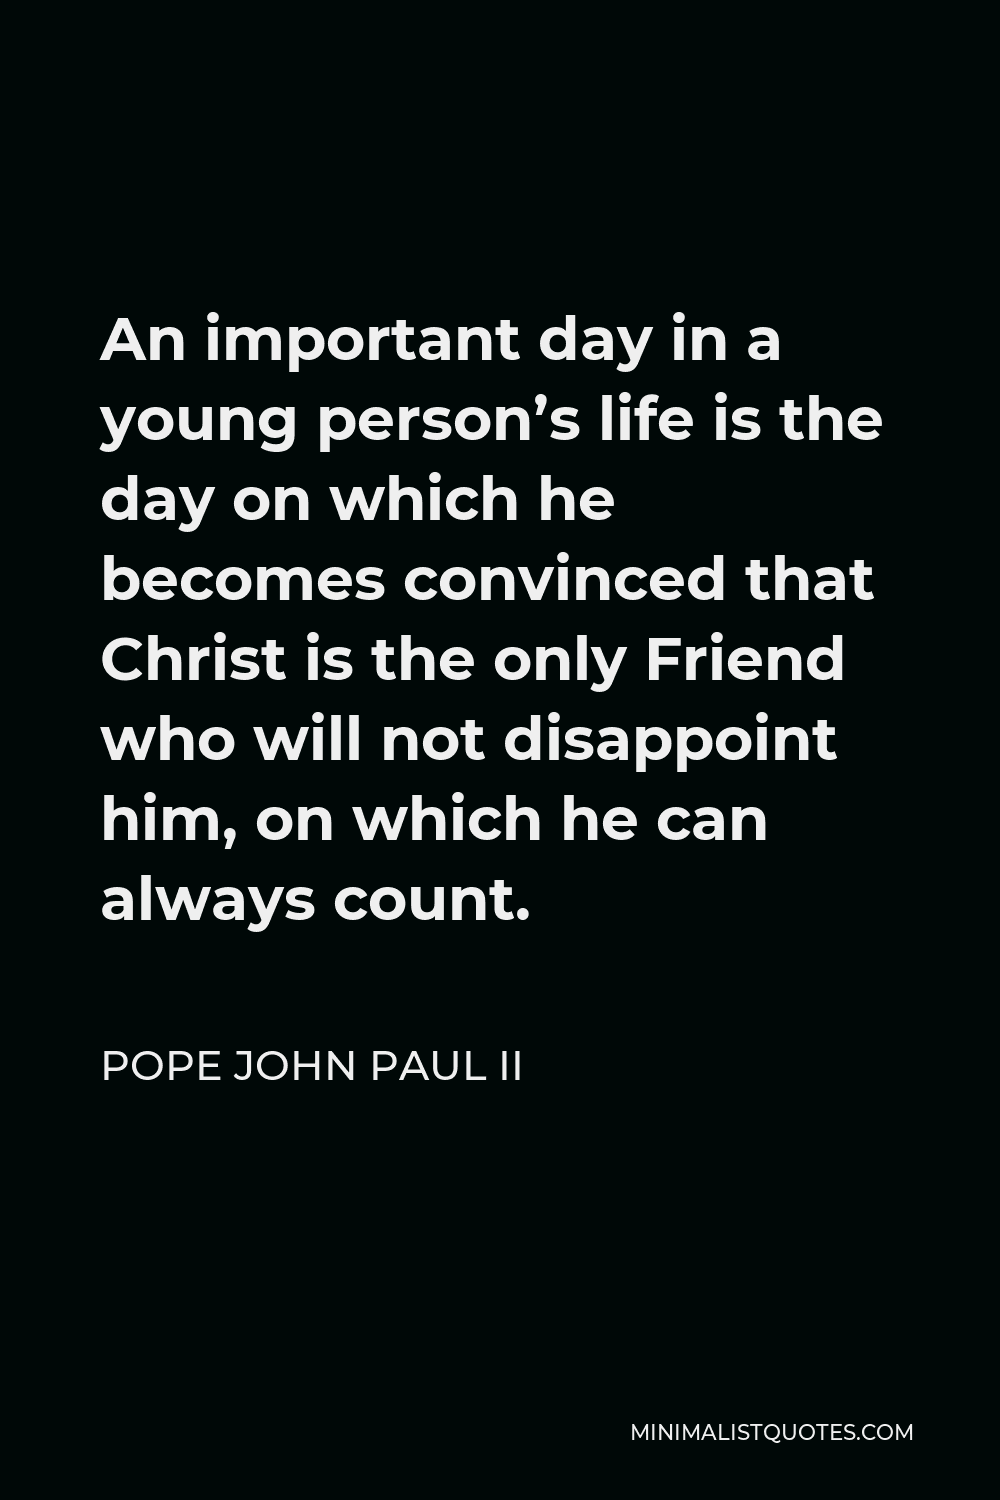 Pope John Paul II Quote - An important day in a young person’s life is the day on which he becomes convinced that Christ is the only Friend who will not disappoint him, on which he can always count.